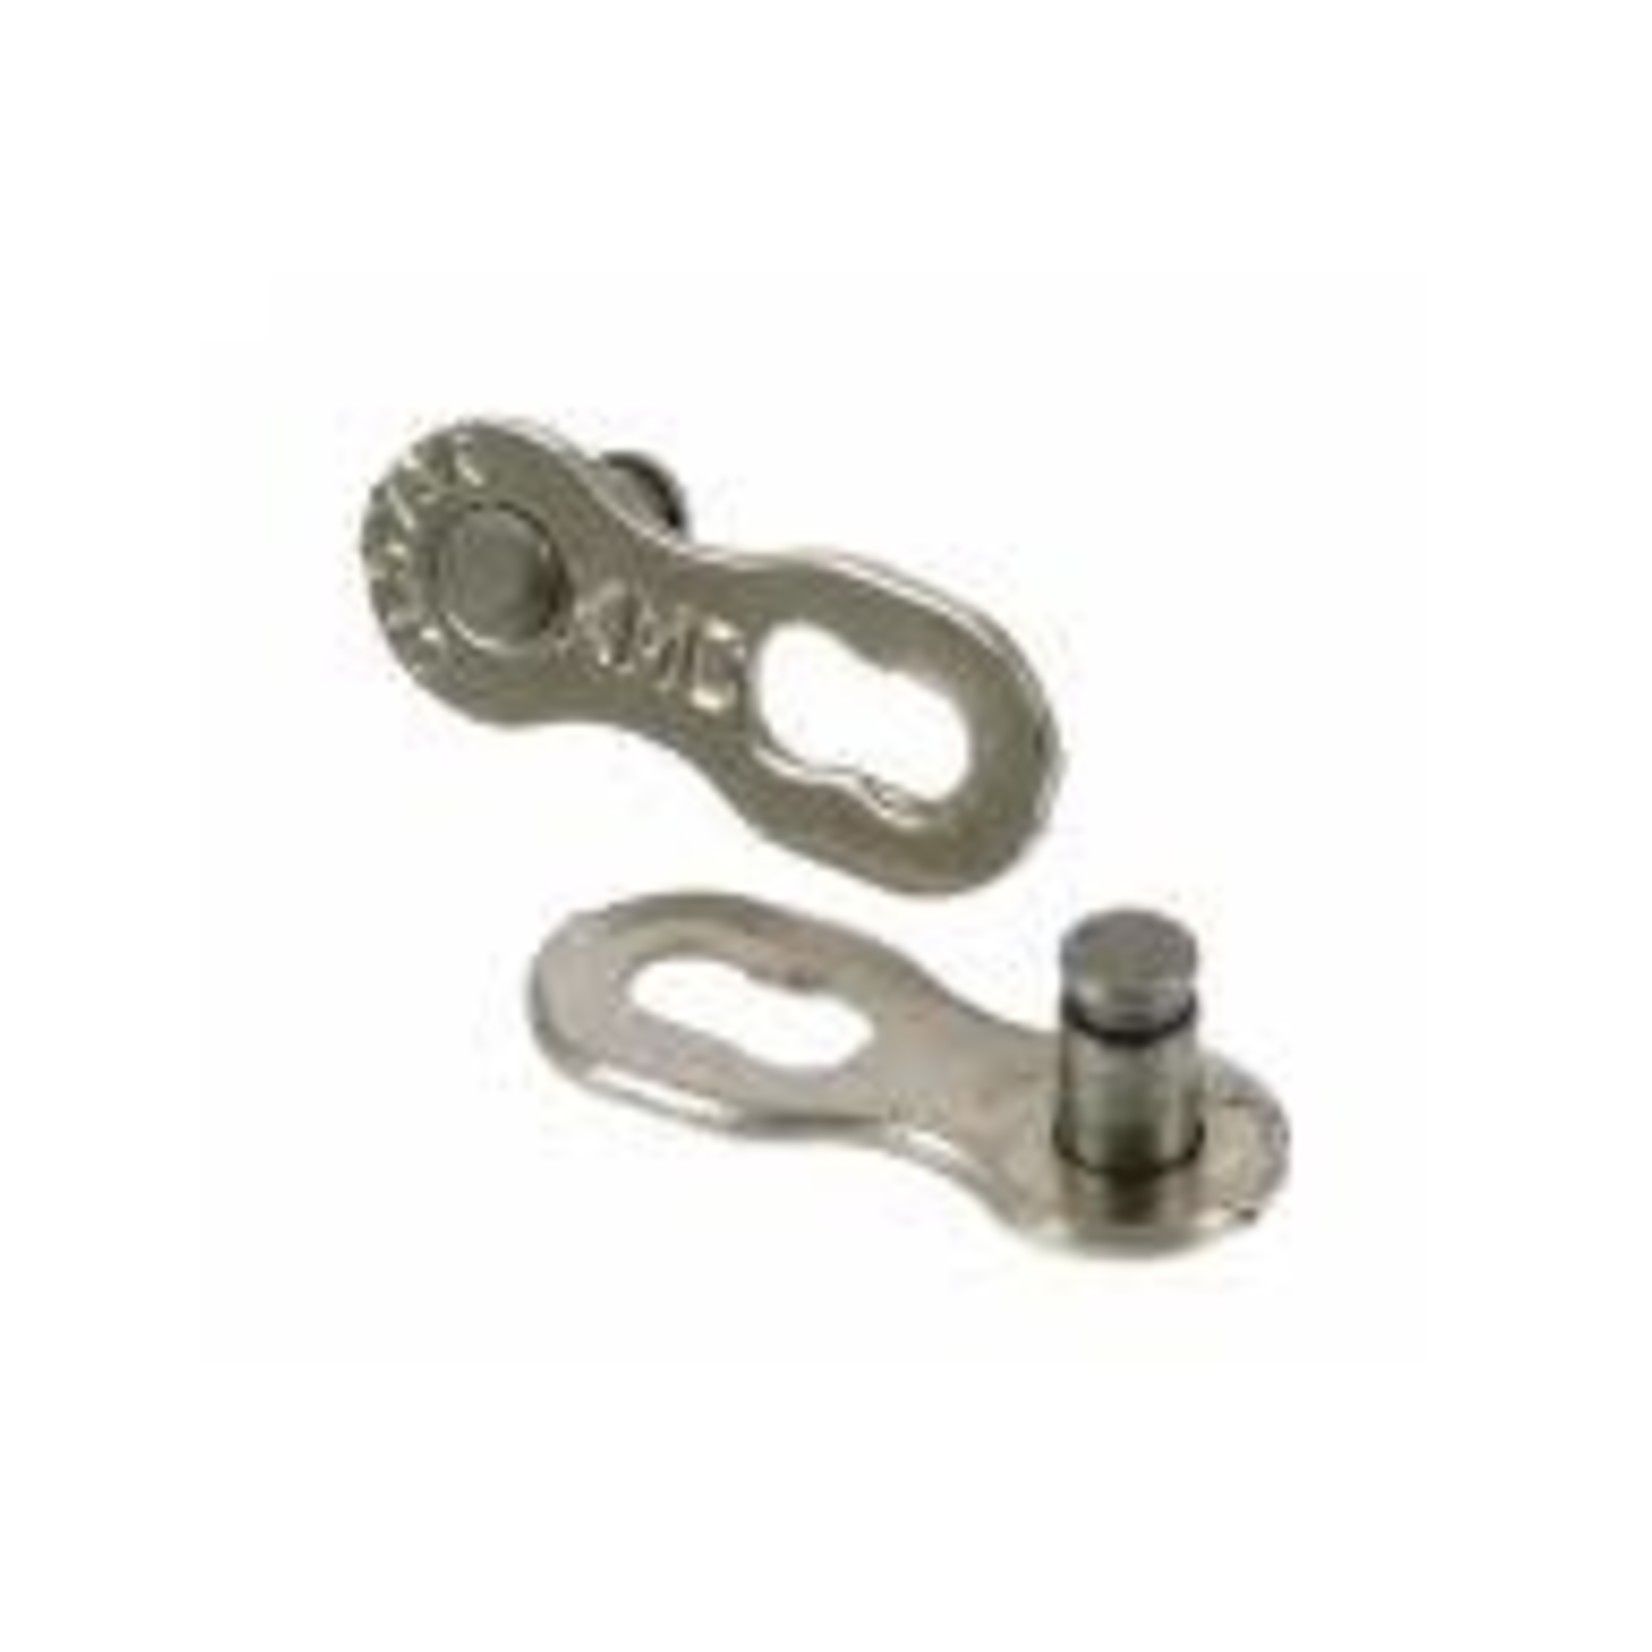 KMC Chain KMC Missing Link Fits 6.6mm (9-speed) Chains Card of 6